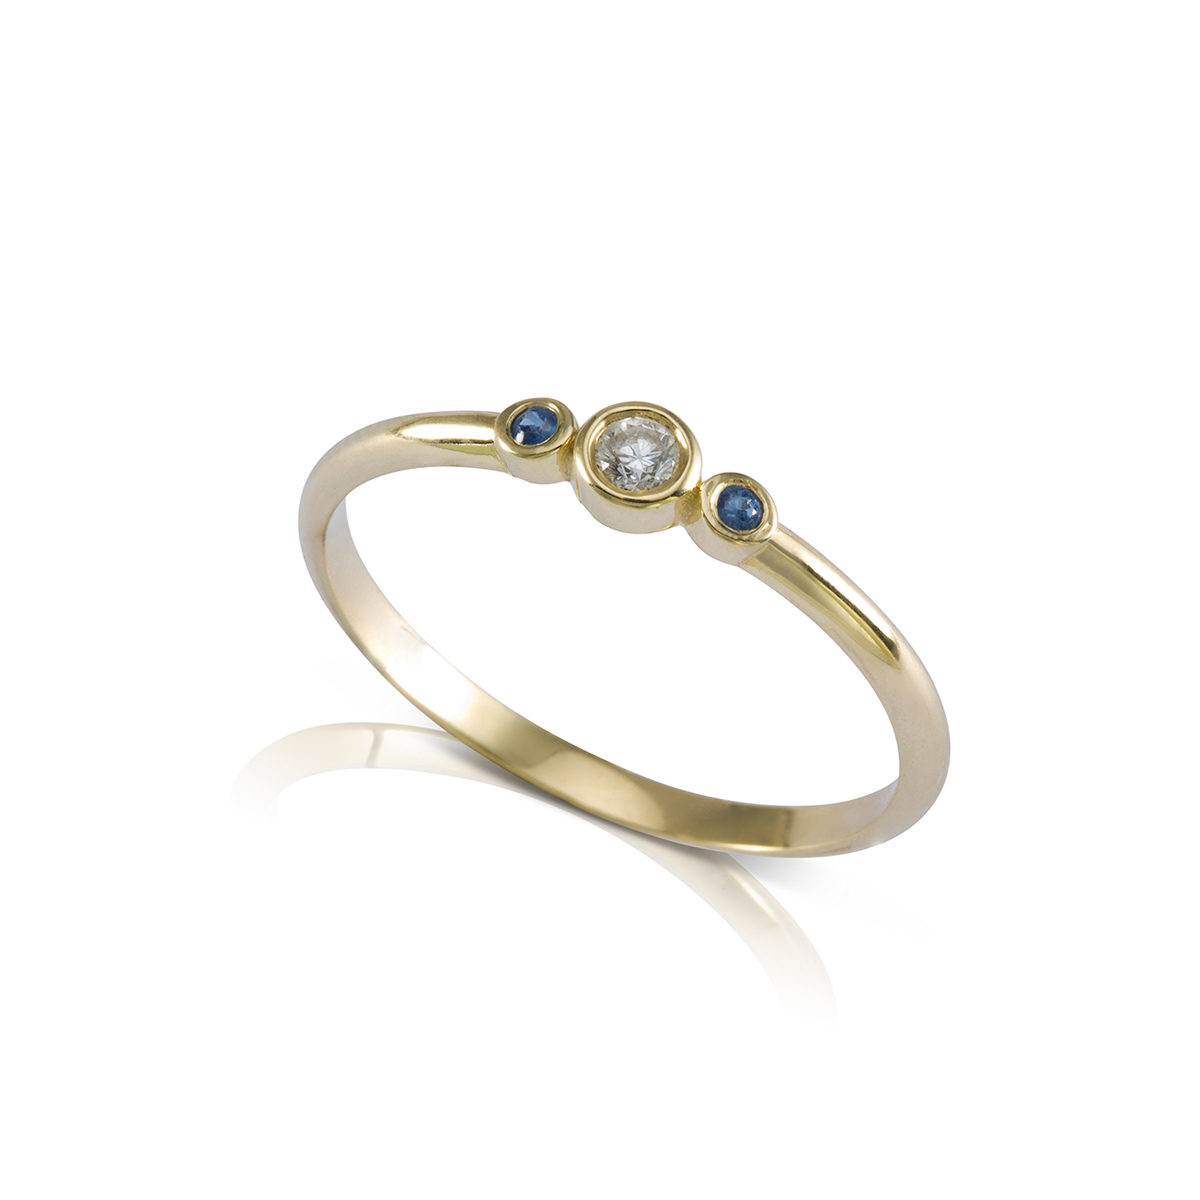 Diamond and sapphires delicate ring